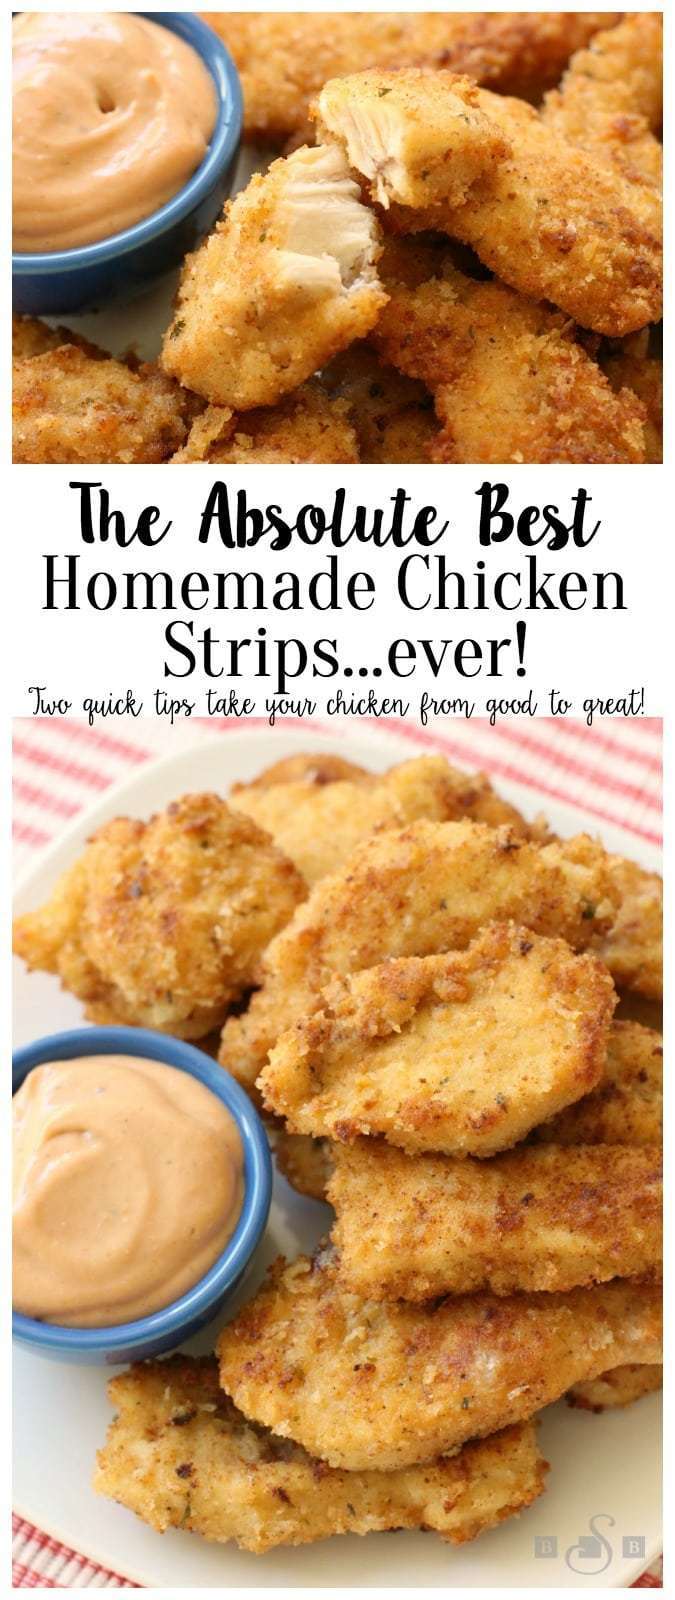 These Homemade Chicken Strips are tender, juicy & flavorful. Easy to make at home as I share 2 tips on how to take #chicken strips from good to great! Chicken #dinner #recipe from Butter With A Side of Bread #appetizers #gameday #chickentenders